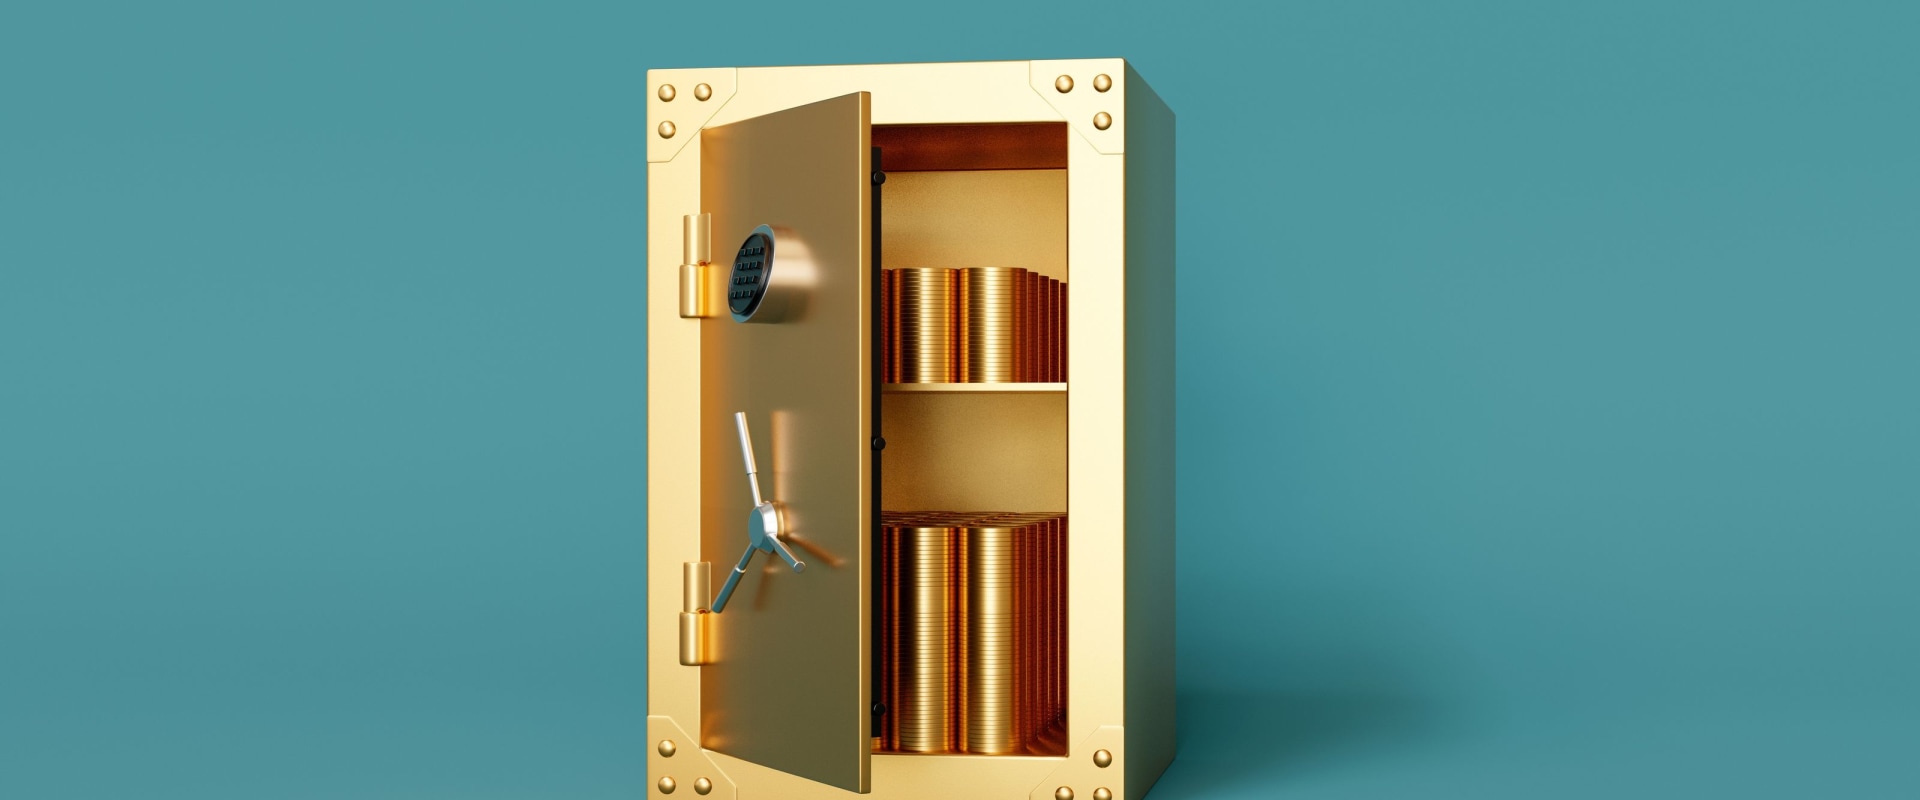 Storing Gold: What You Need to Know About Home Storage and Bank Safes